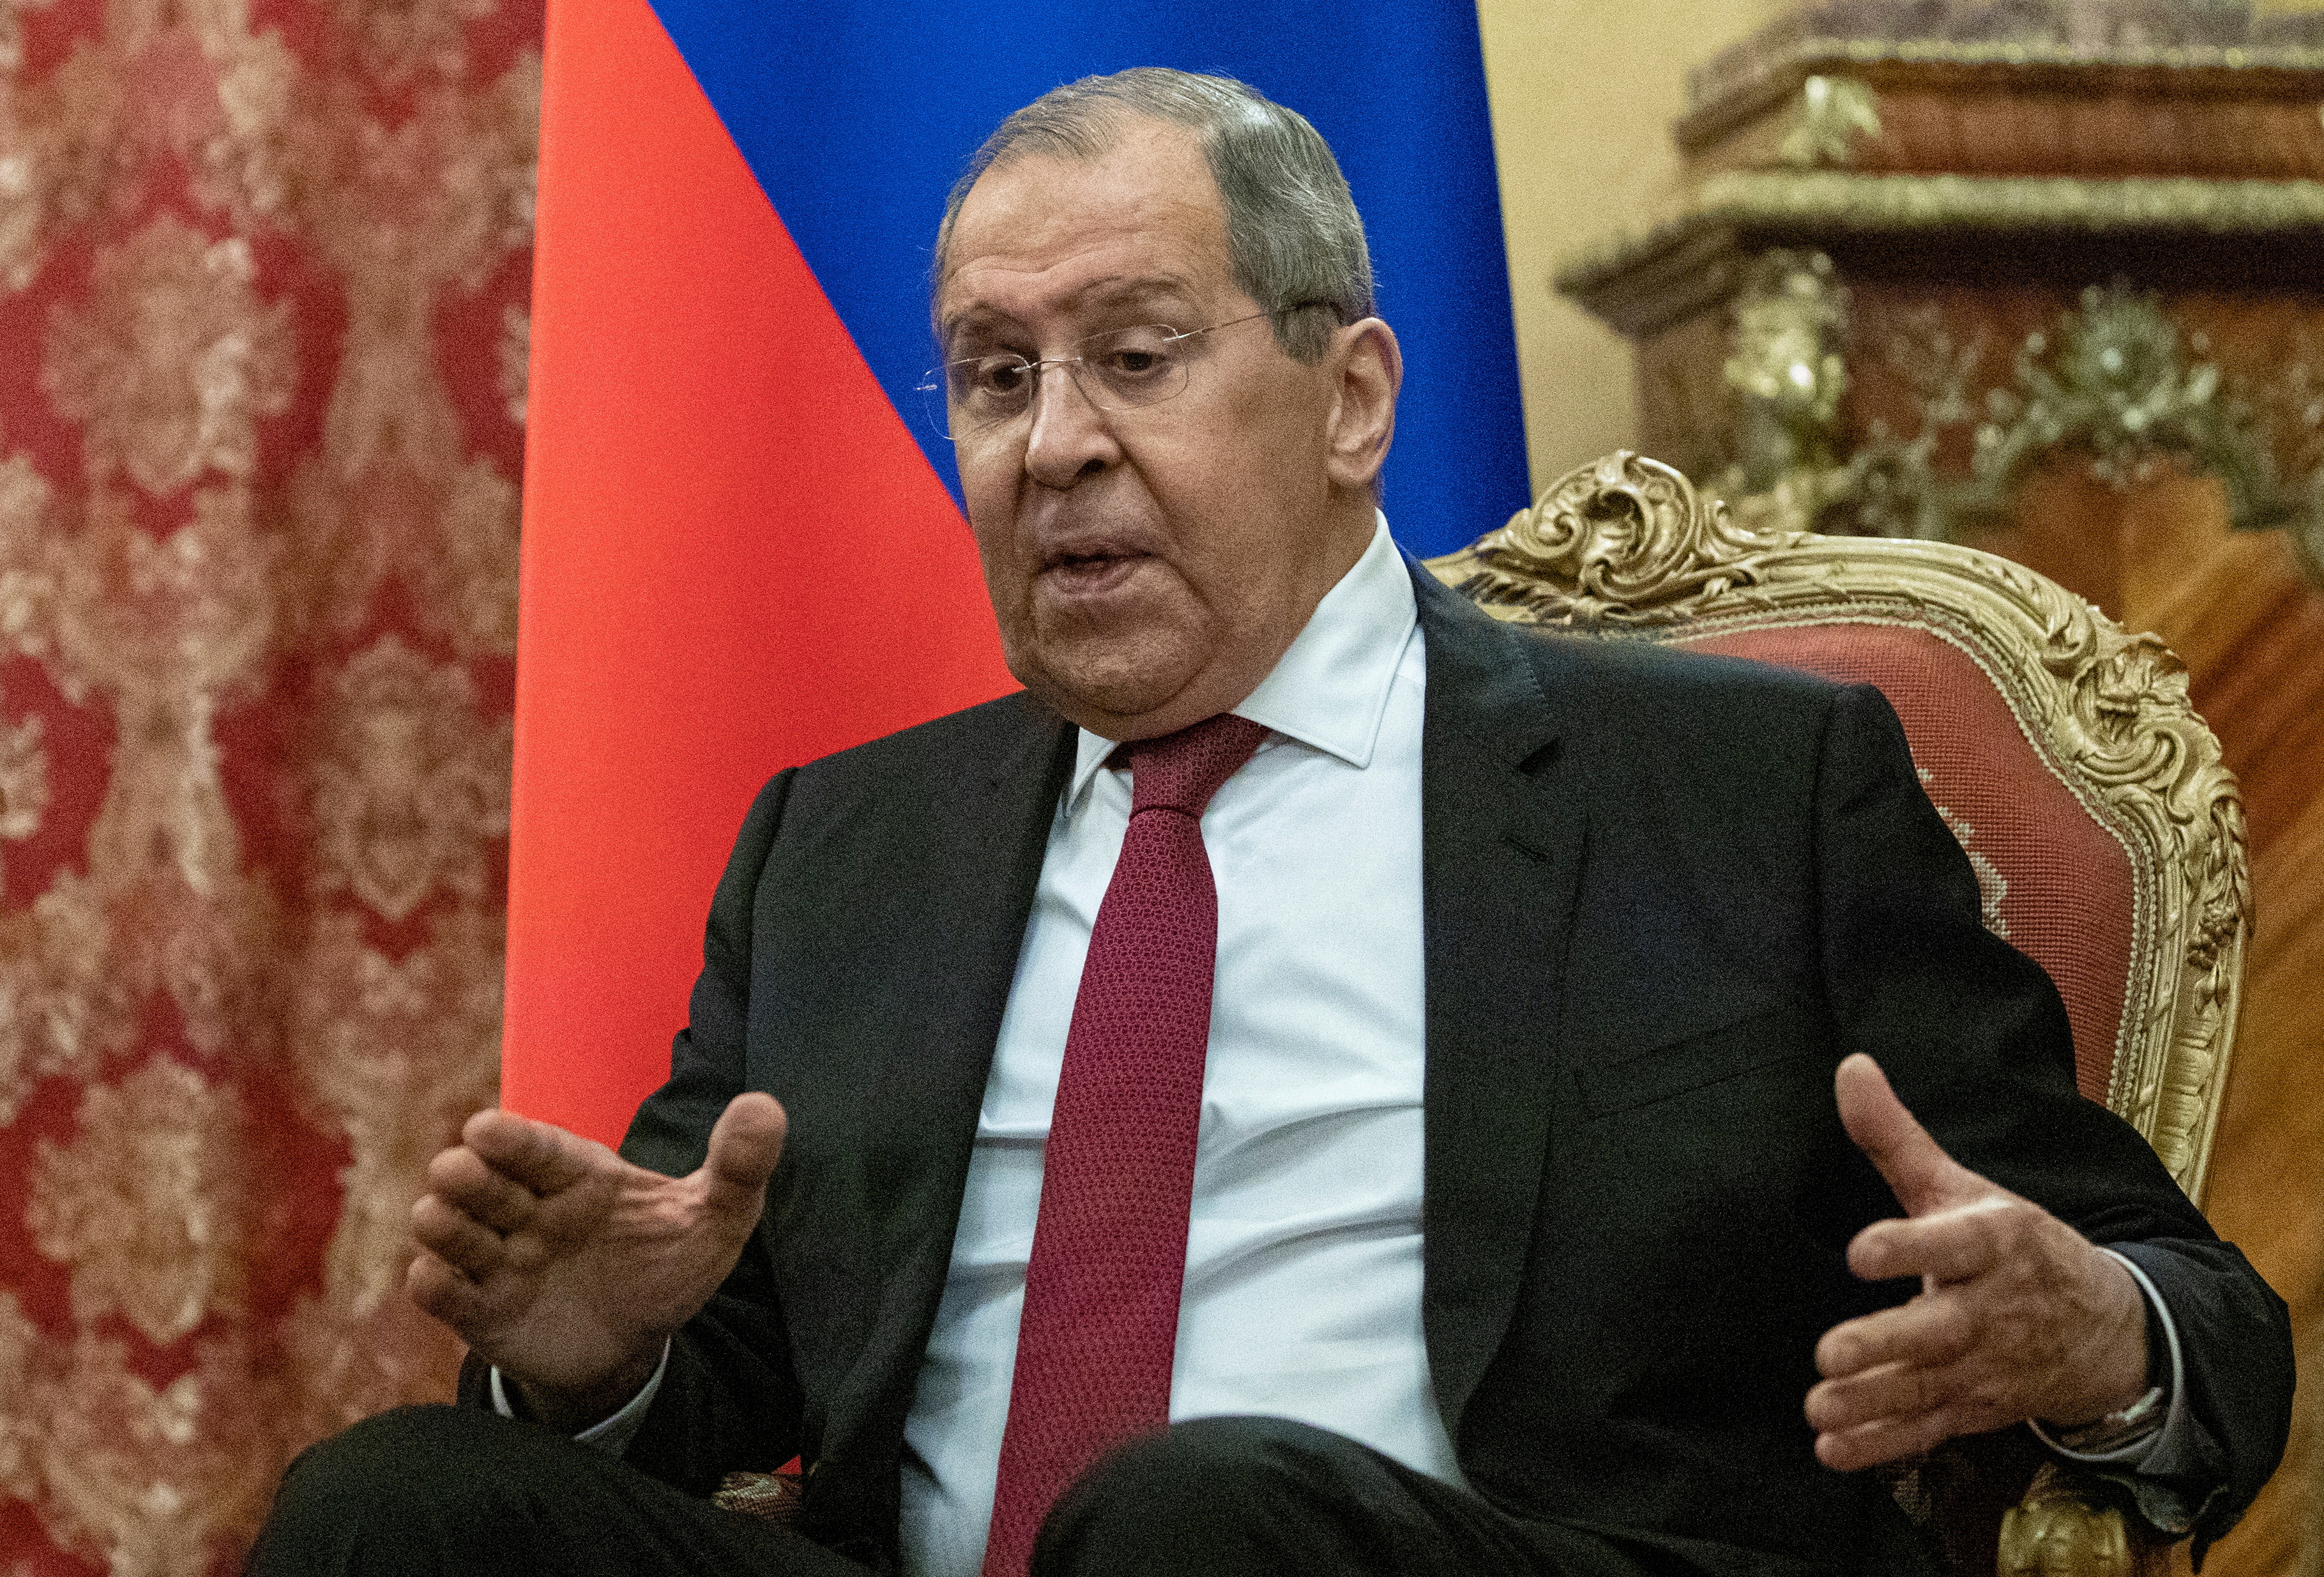 Russian Foreign Minister Sergei Lavrov meets with U.N. Special Envoy for Syria Geir Pedersen in Moscow